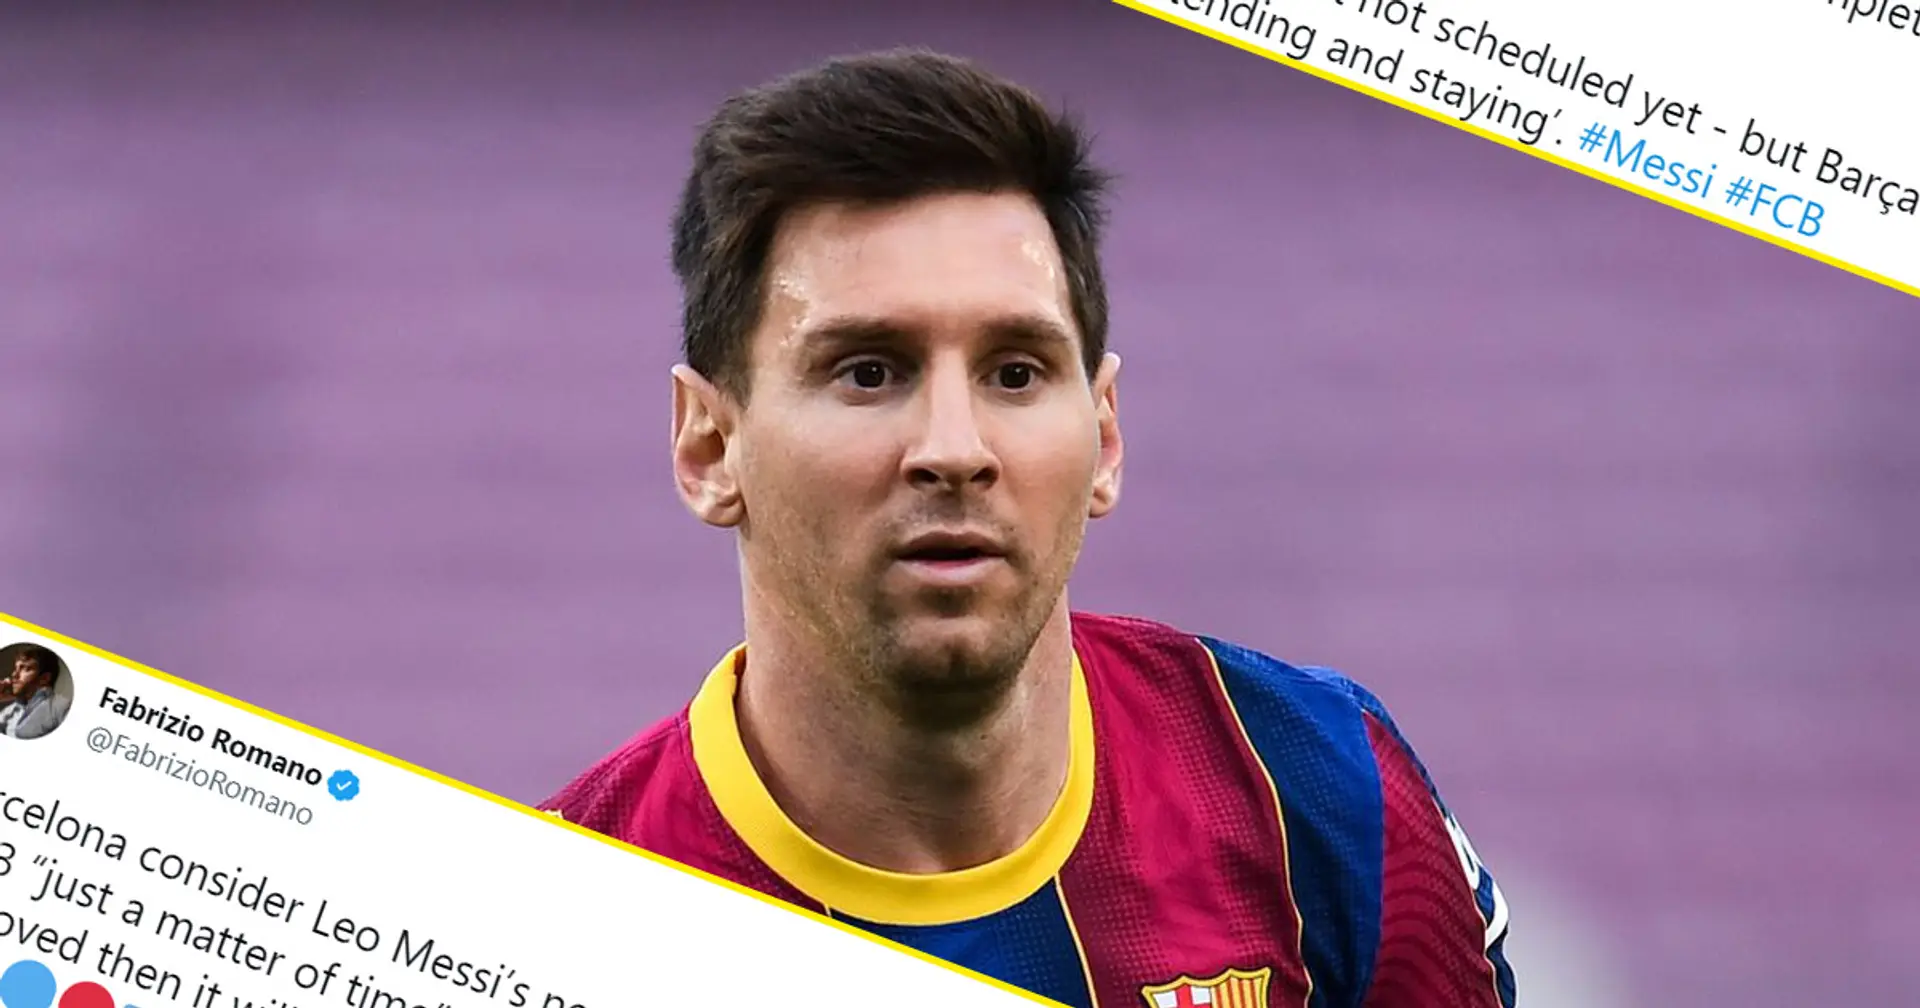 Barca consider Messi’s extension 'just a matter of time': Fabrizio Romano (reliability: 5 stars)